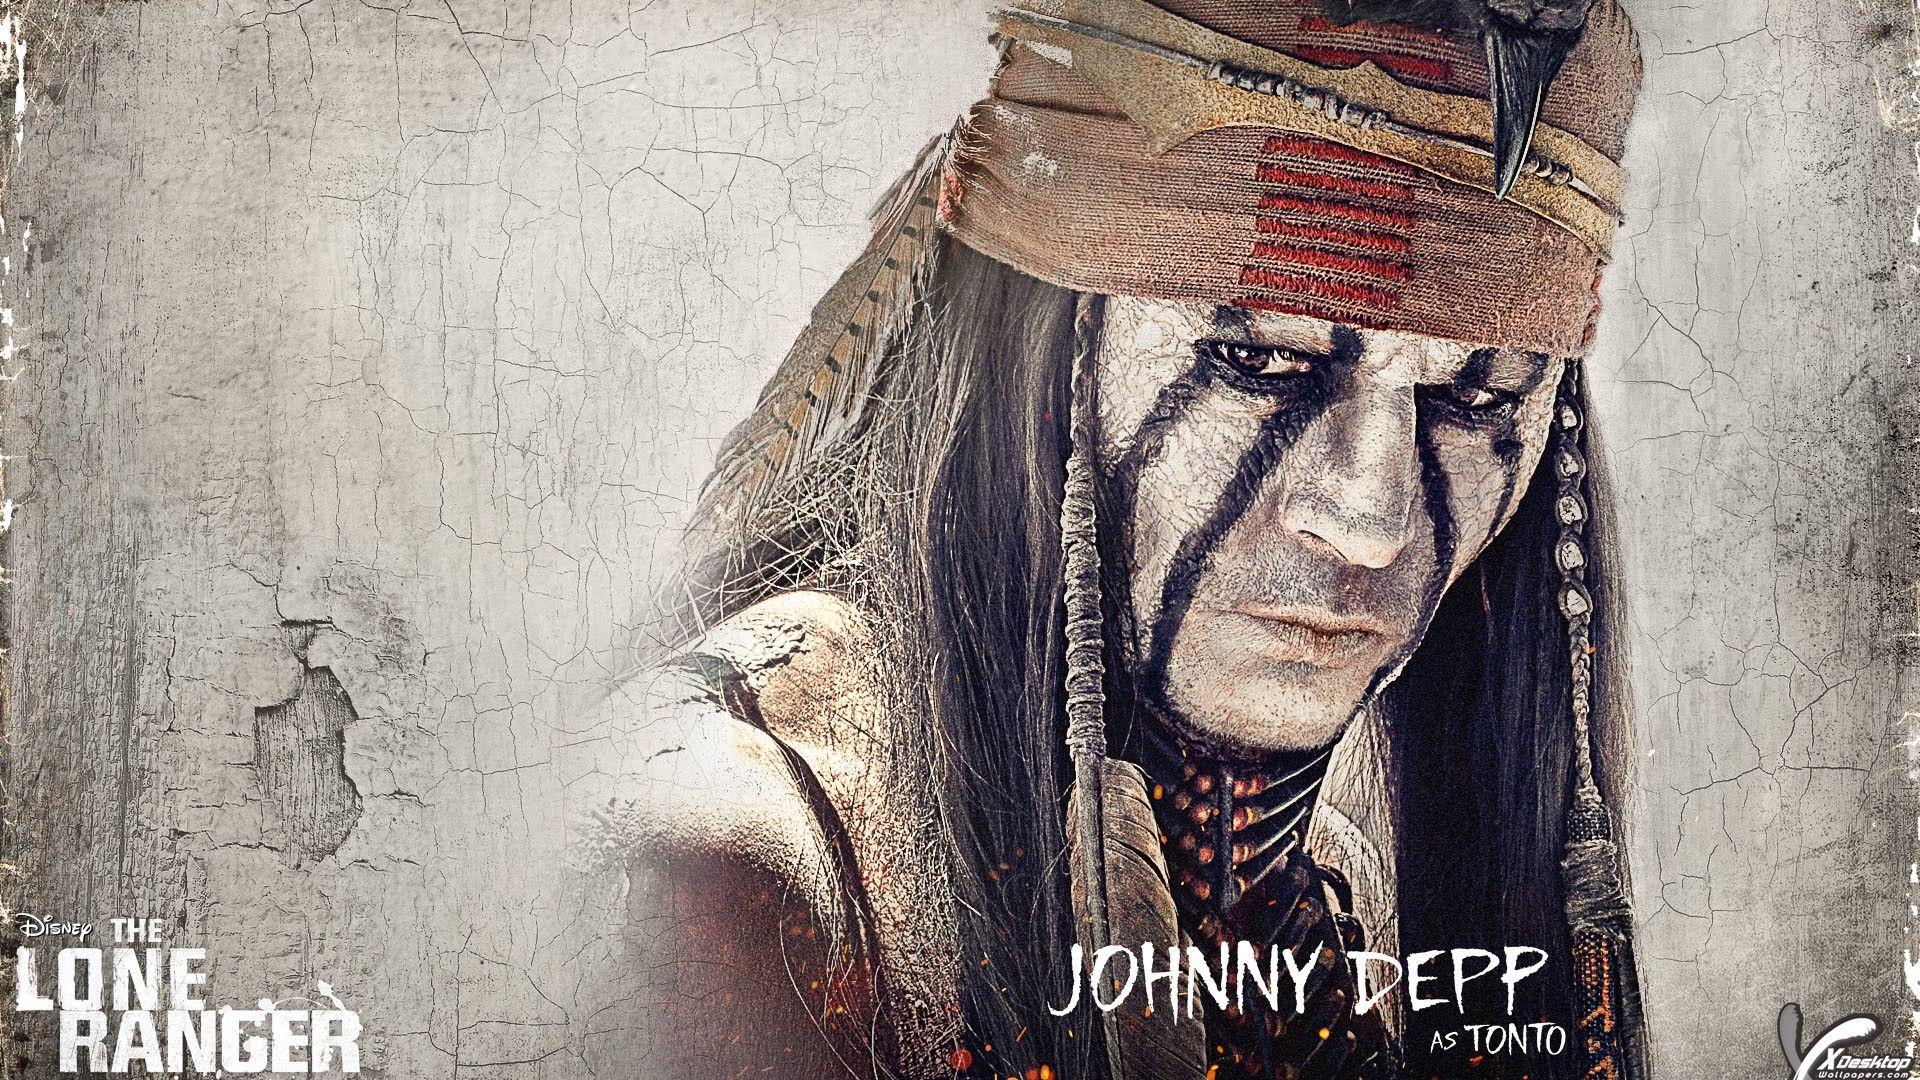 The Lone Ranger Wallpaper, Photo & Image in HD